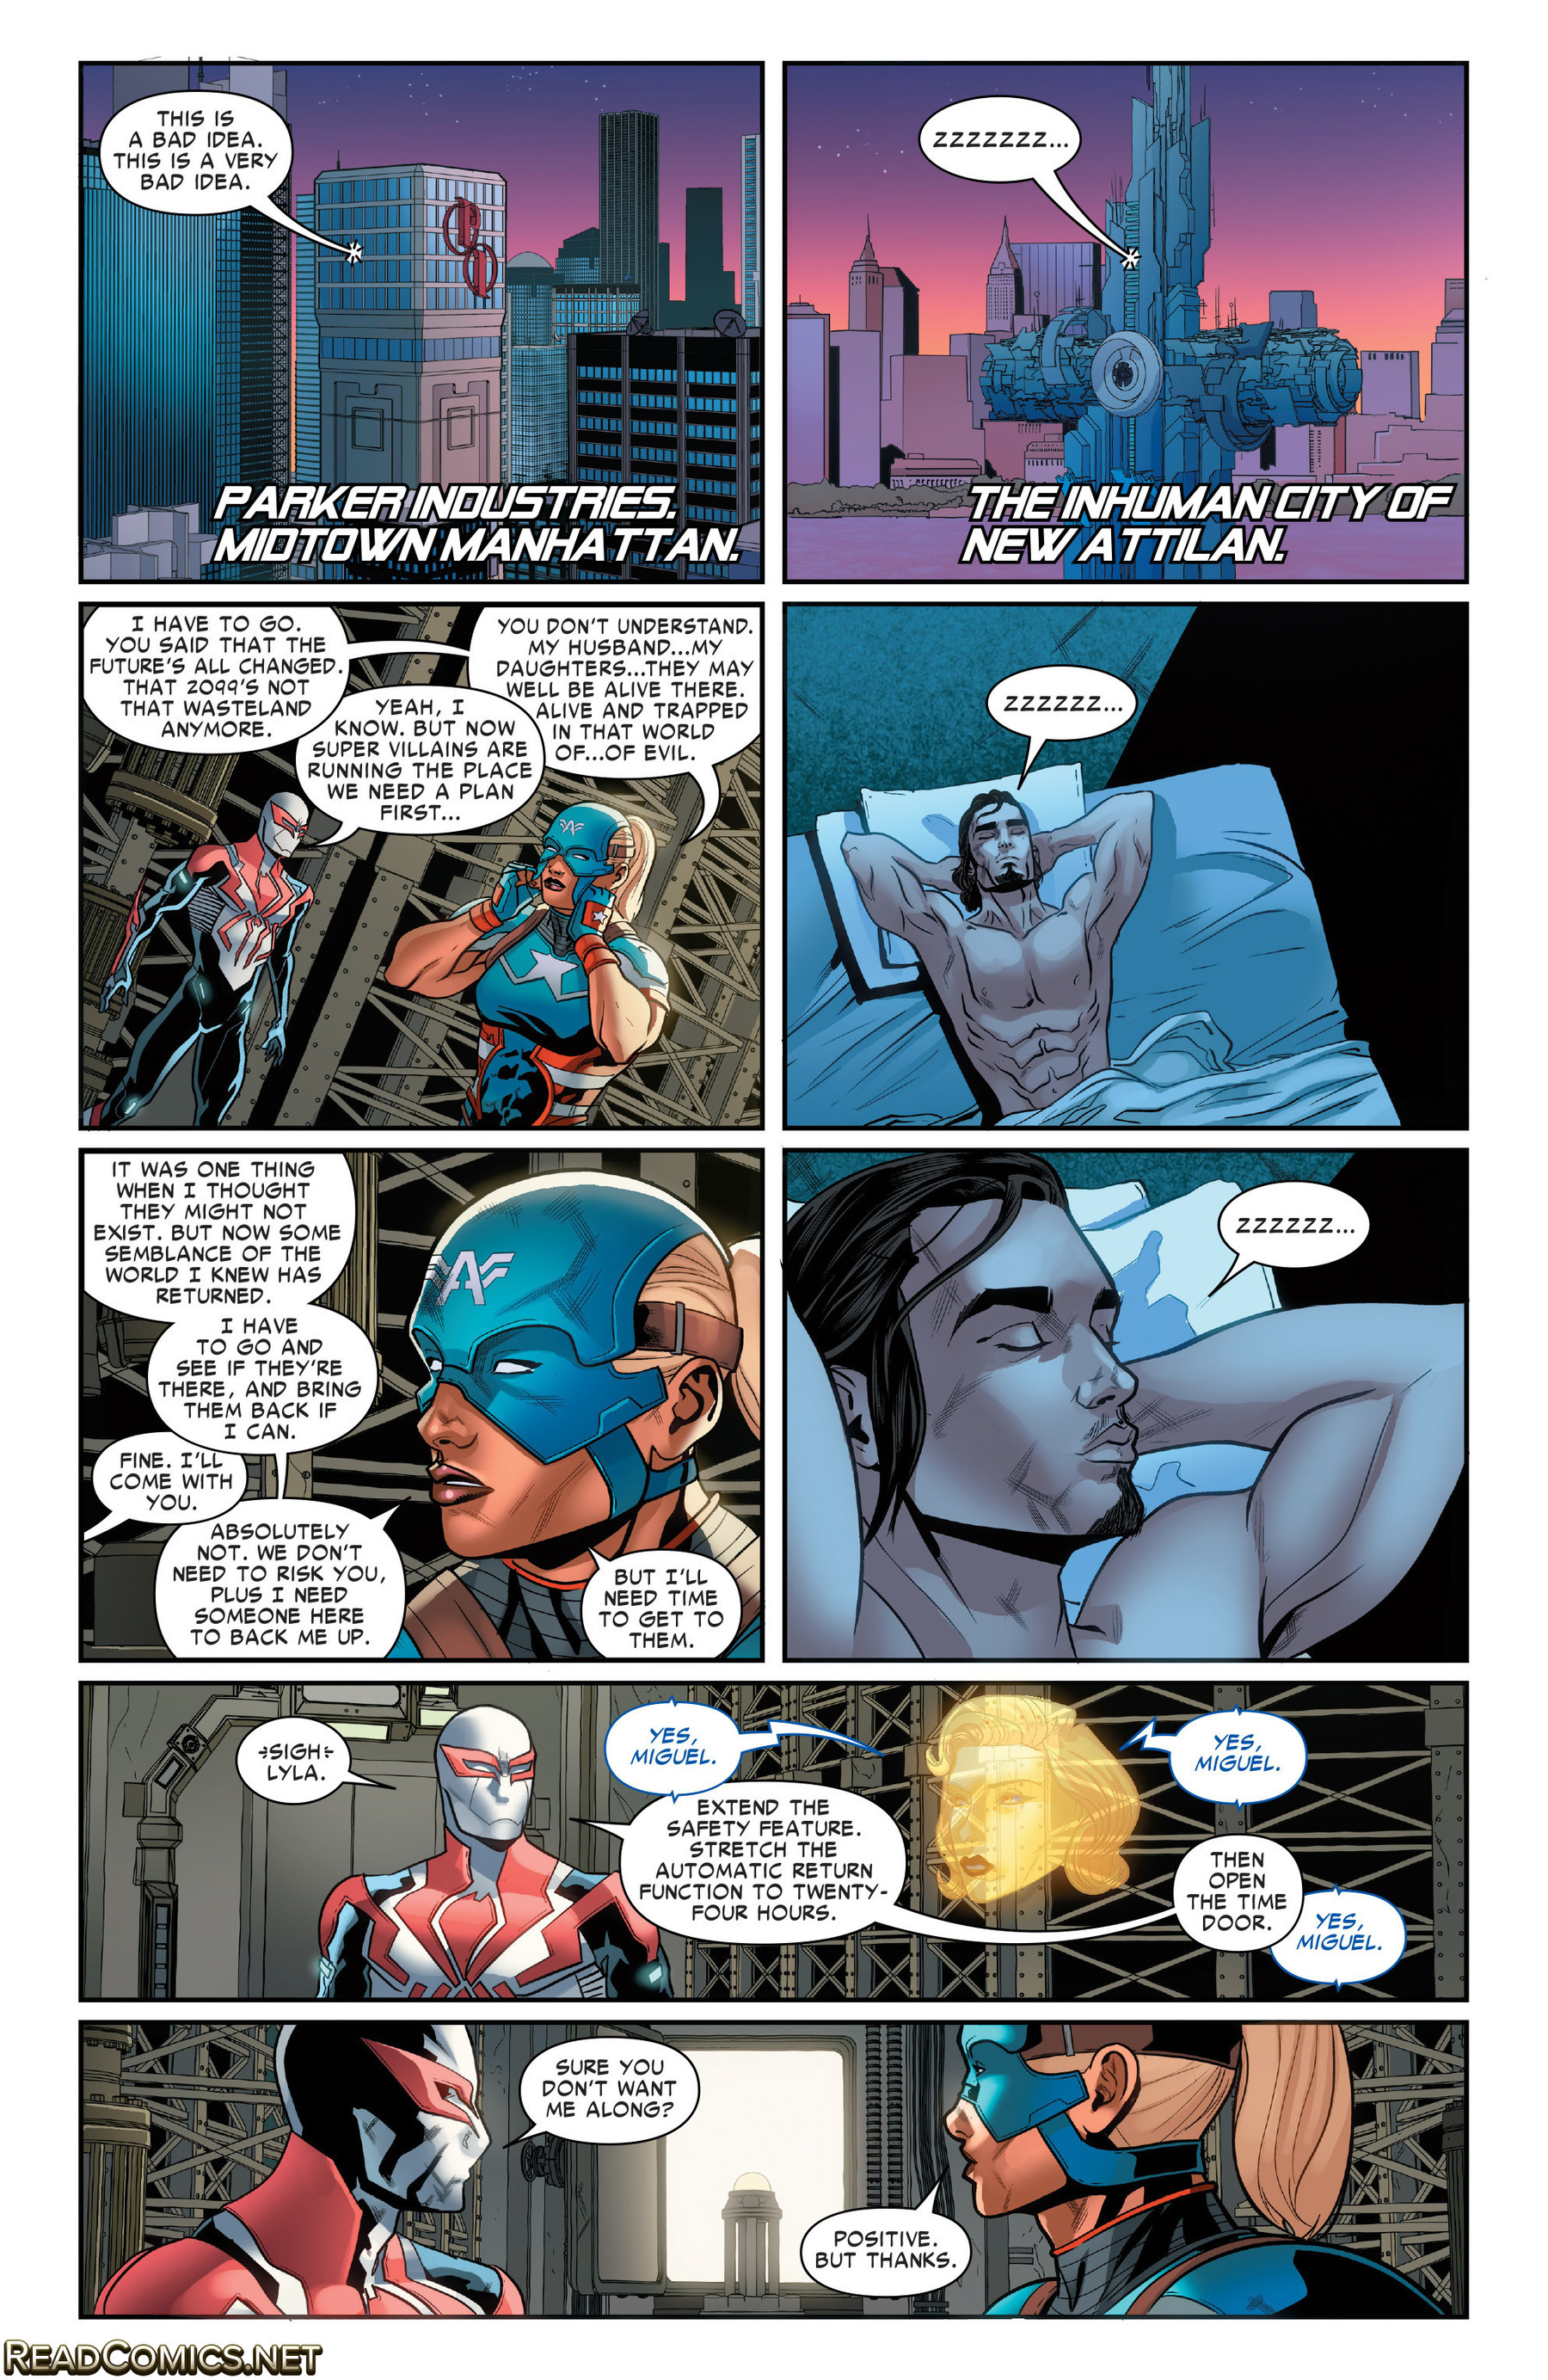 Spider-Man 2099 (2015-): Chapter 13 - Page 2